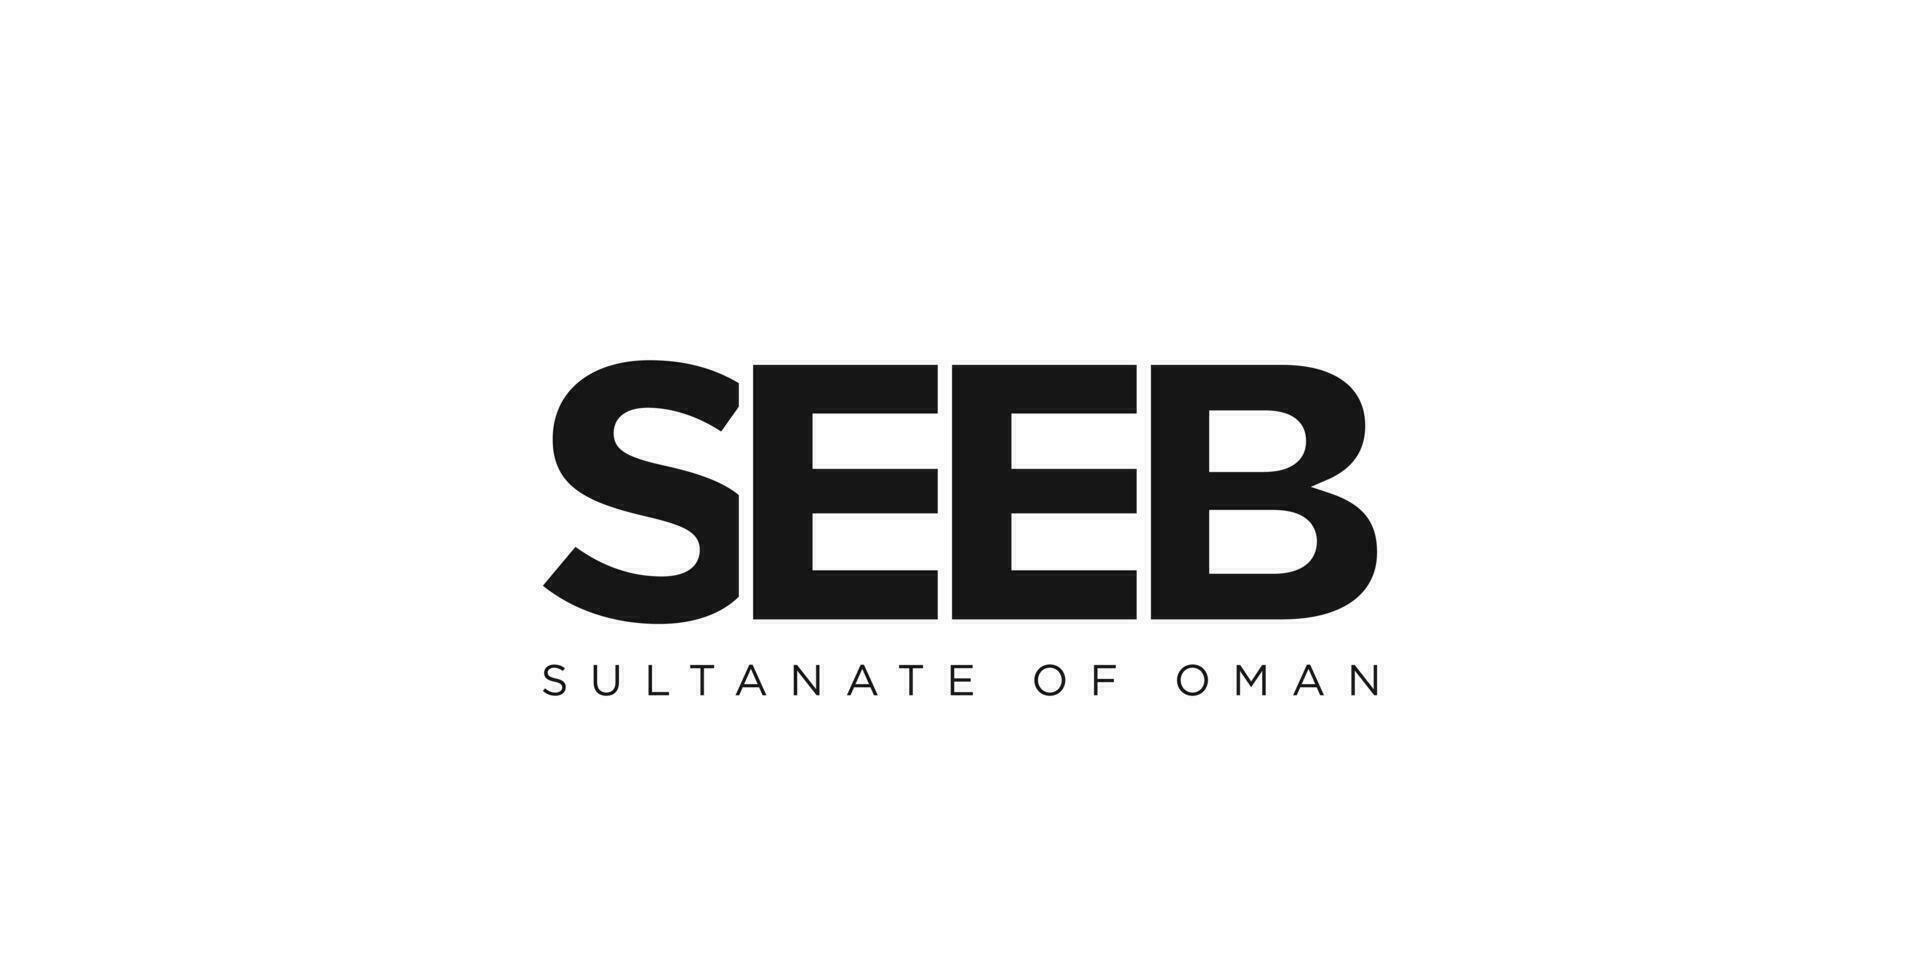 Seeb in the Oman emblem. The design features a geometric style, vector illustration with bold typography in a modern font. The graphic slogan lettering.